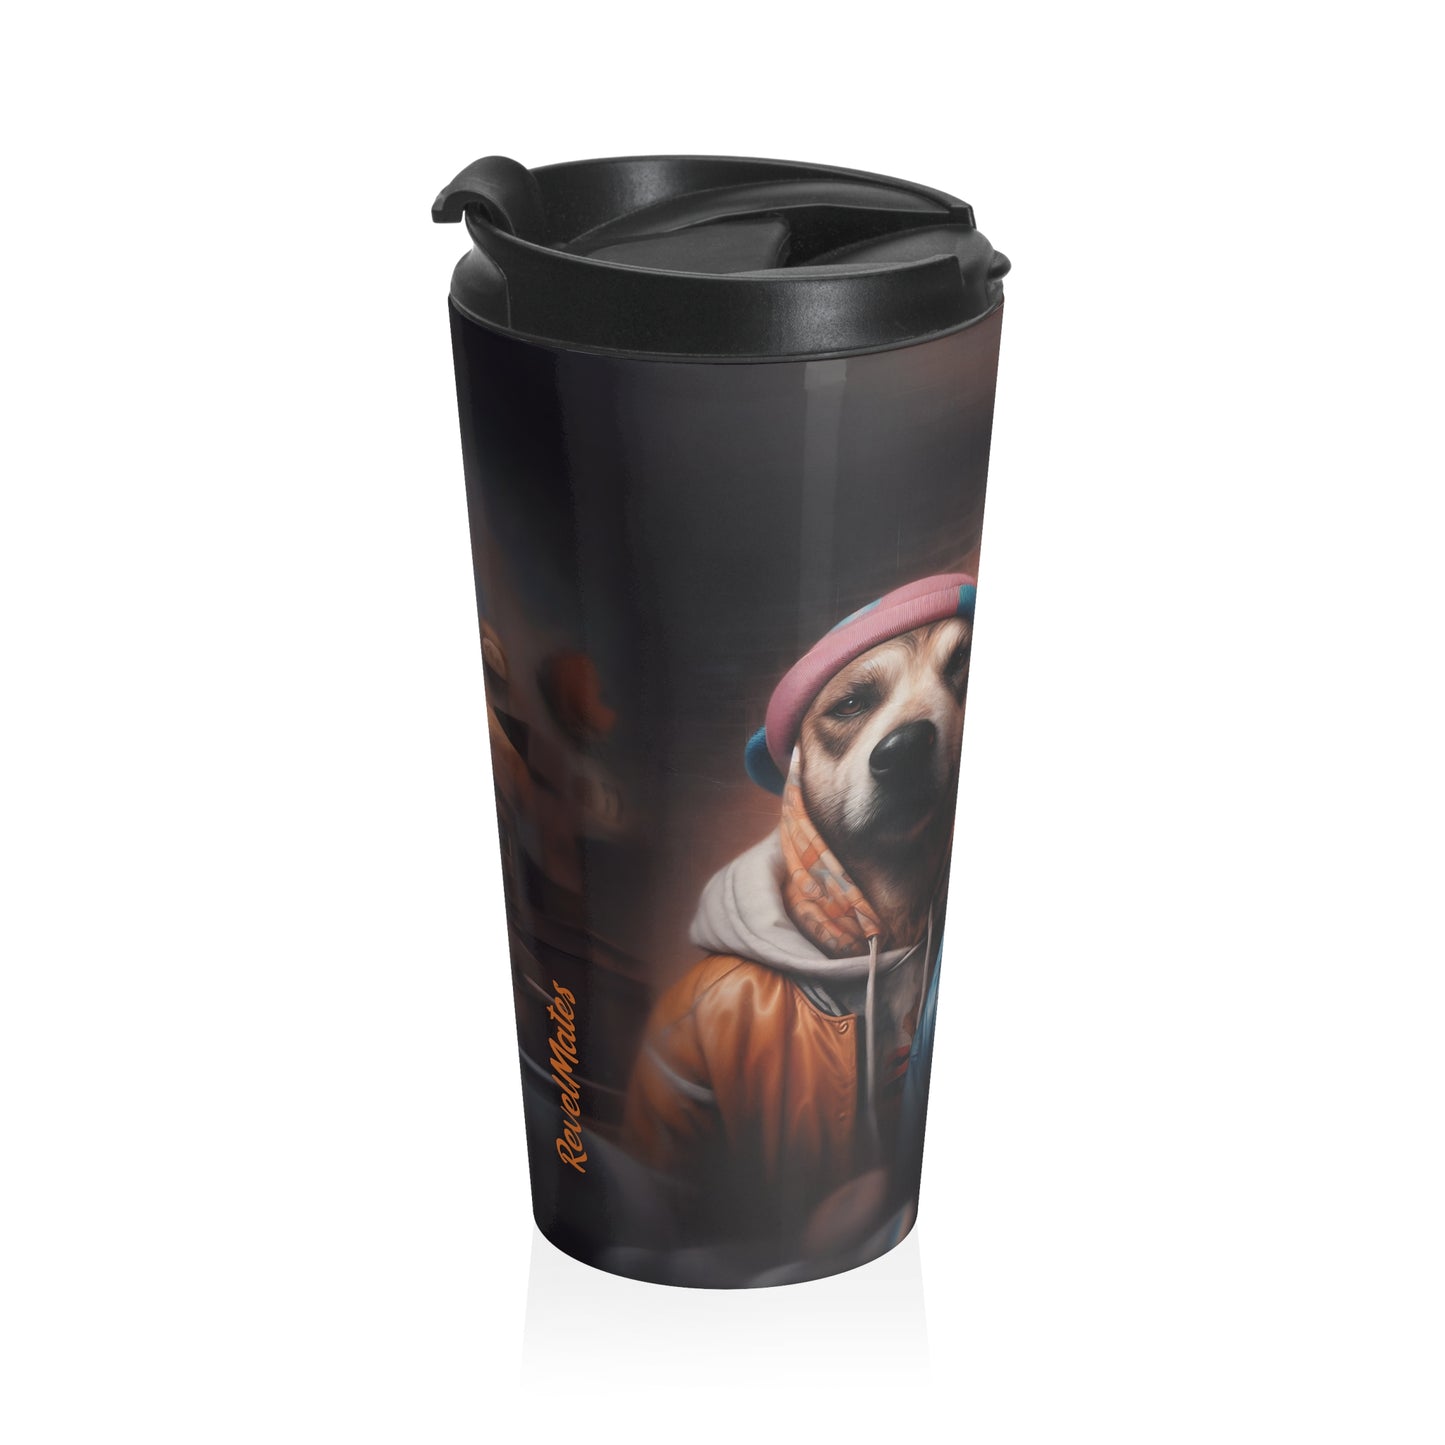 Stainless Steel Travel Mug With Cup 15oz (440ml) | Hip-Hop Brothers Design